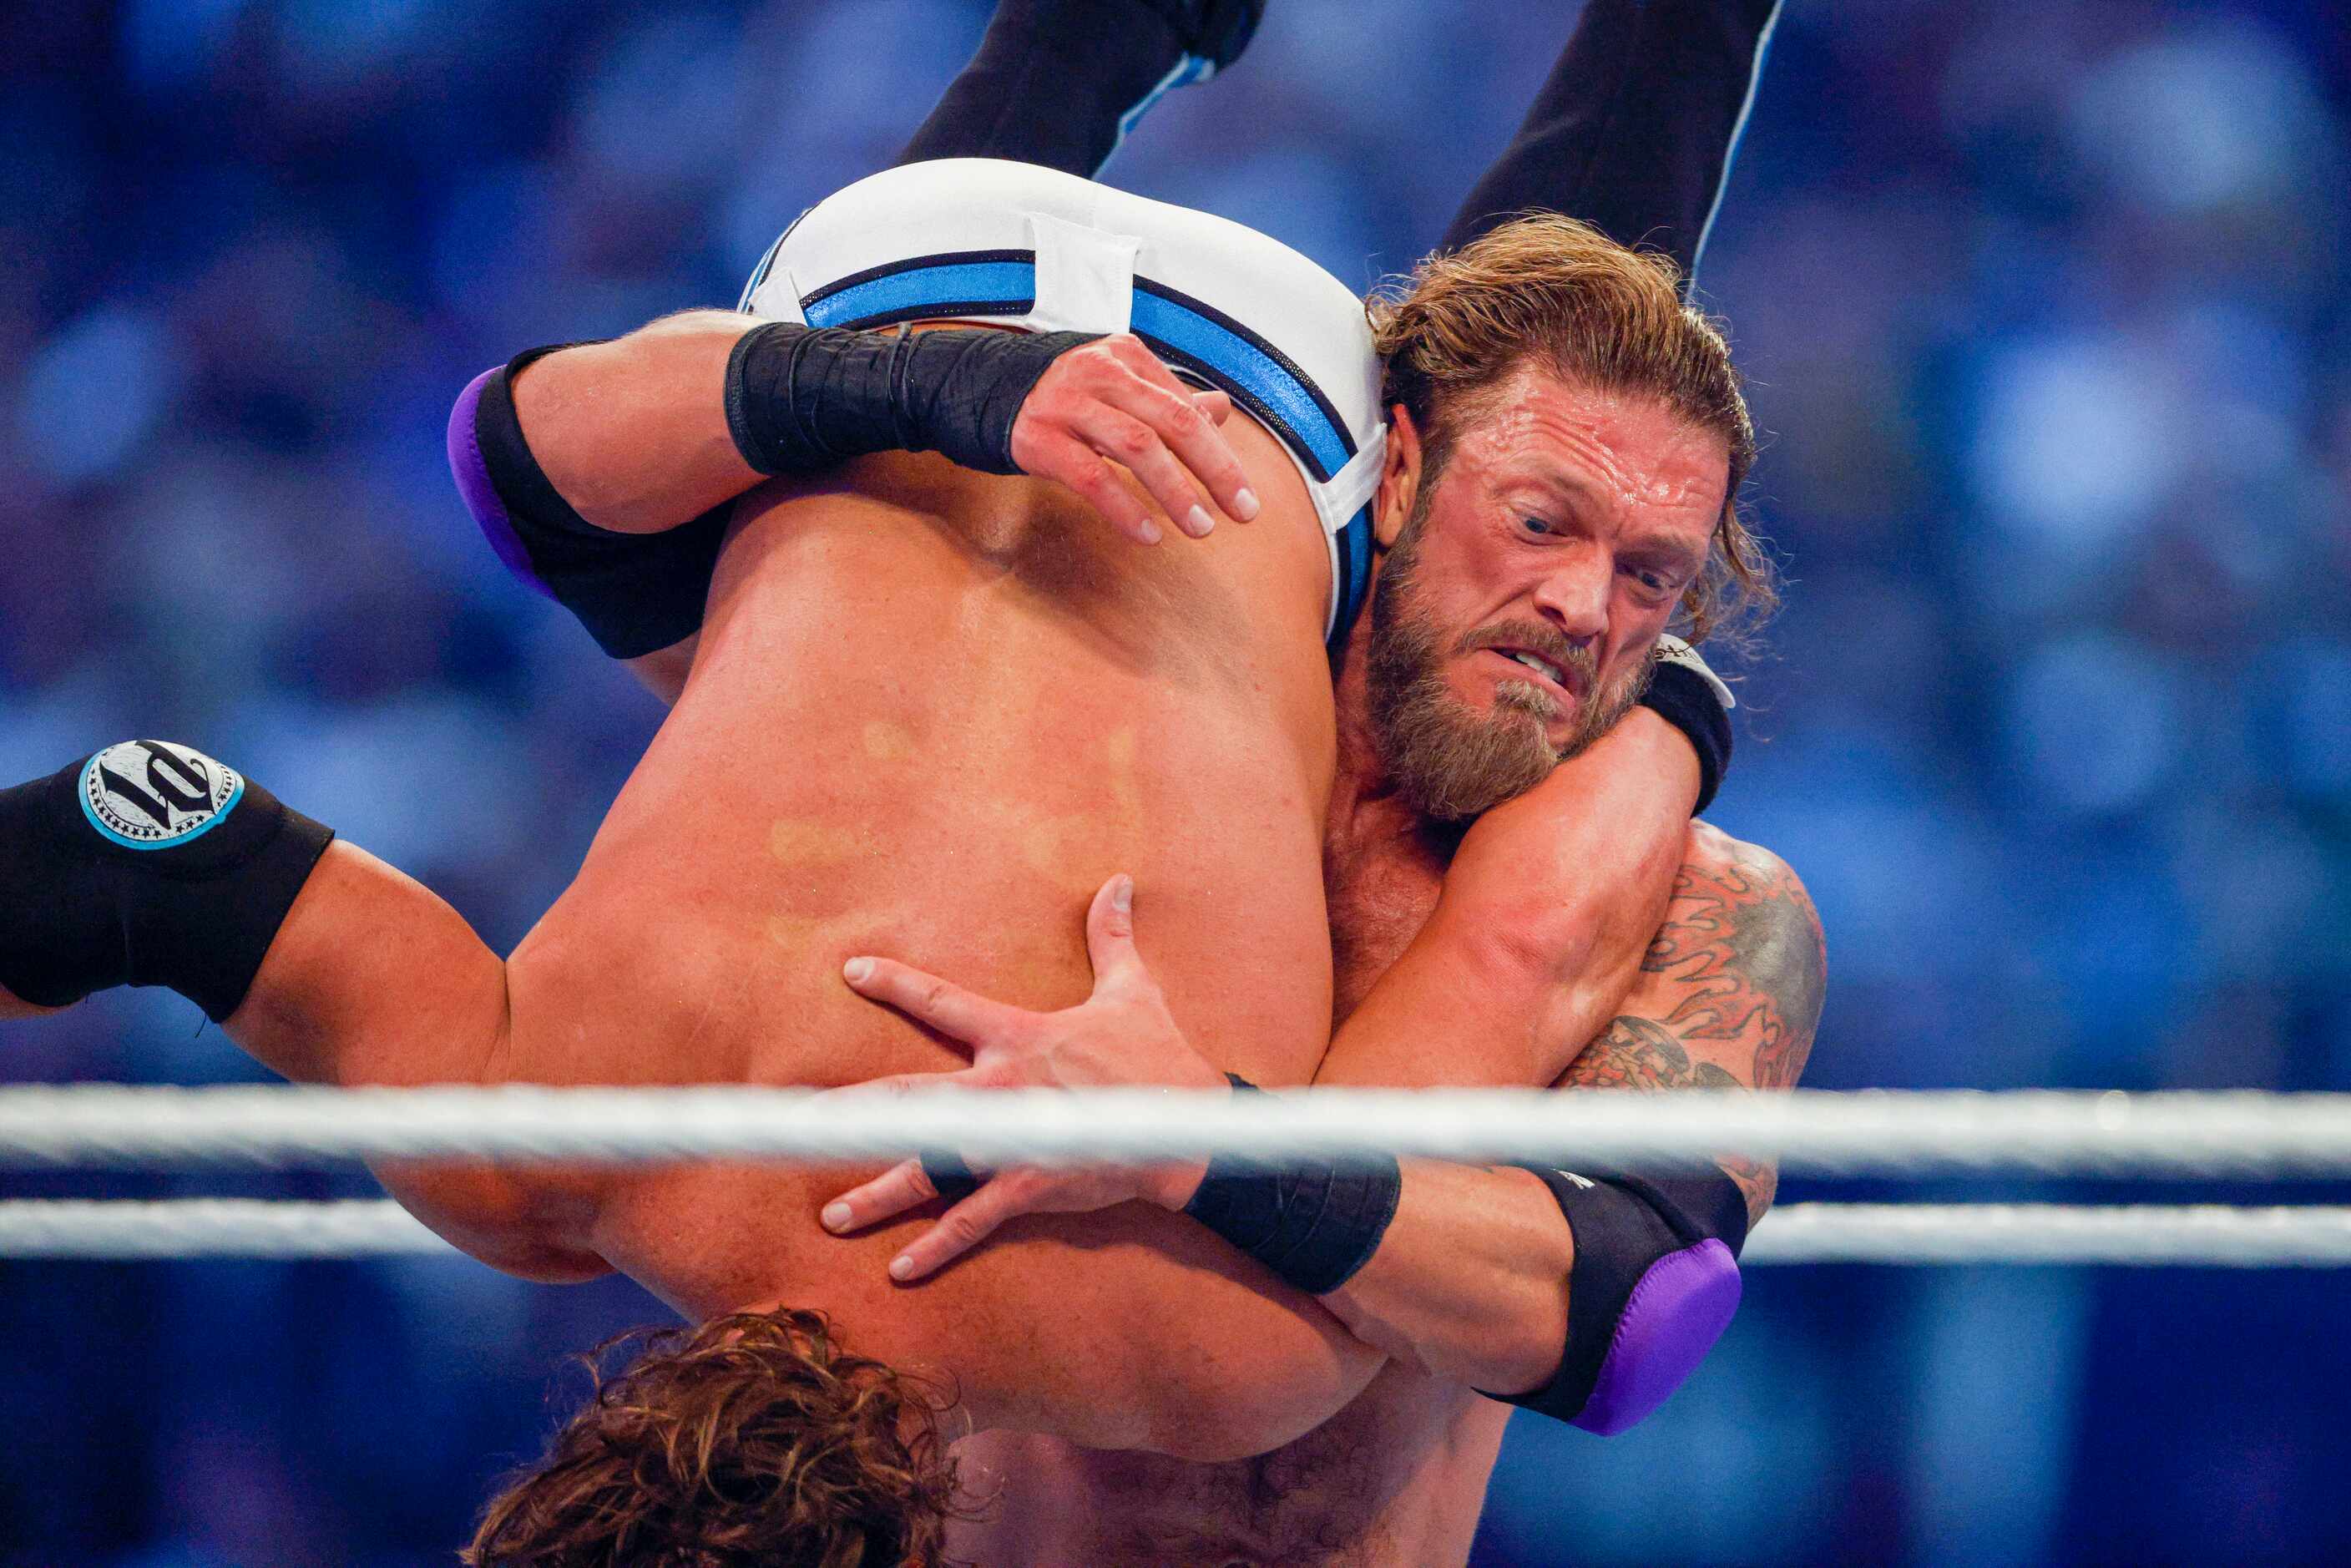 Edge (right) carries AJ Styles during a match at WrestleMania Sunday at AT&T Stadium in...